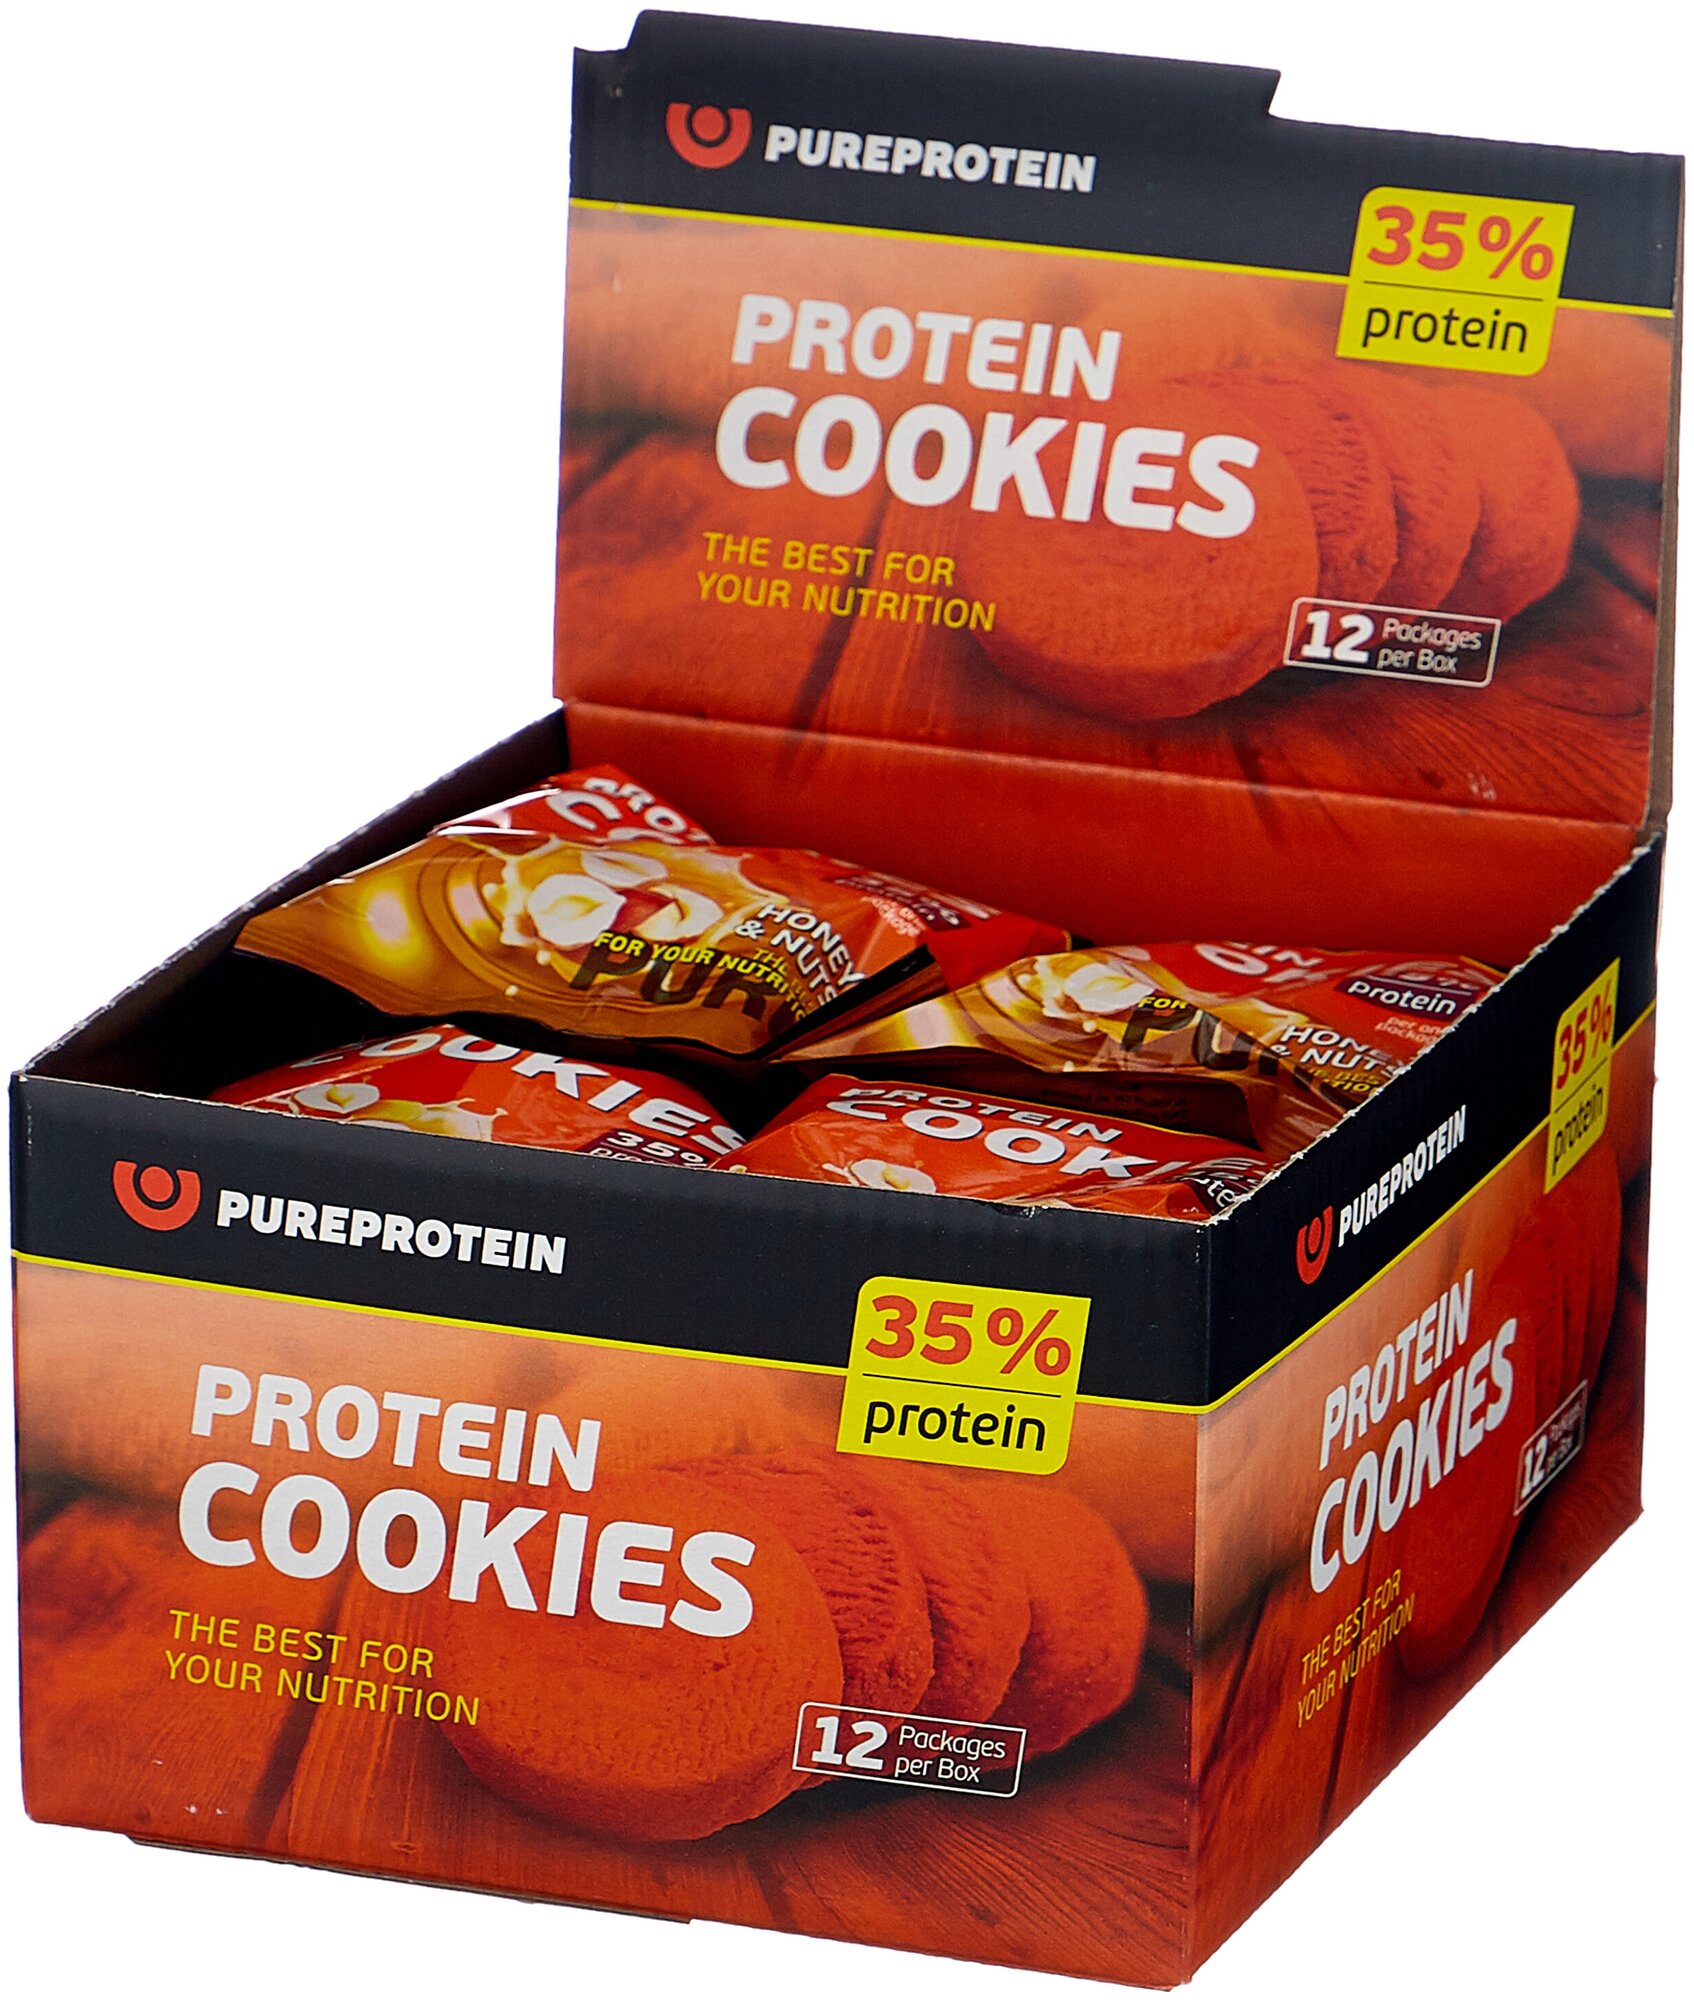   Protein Cookies  PureProtein :   